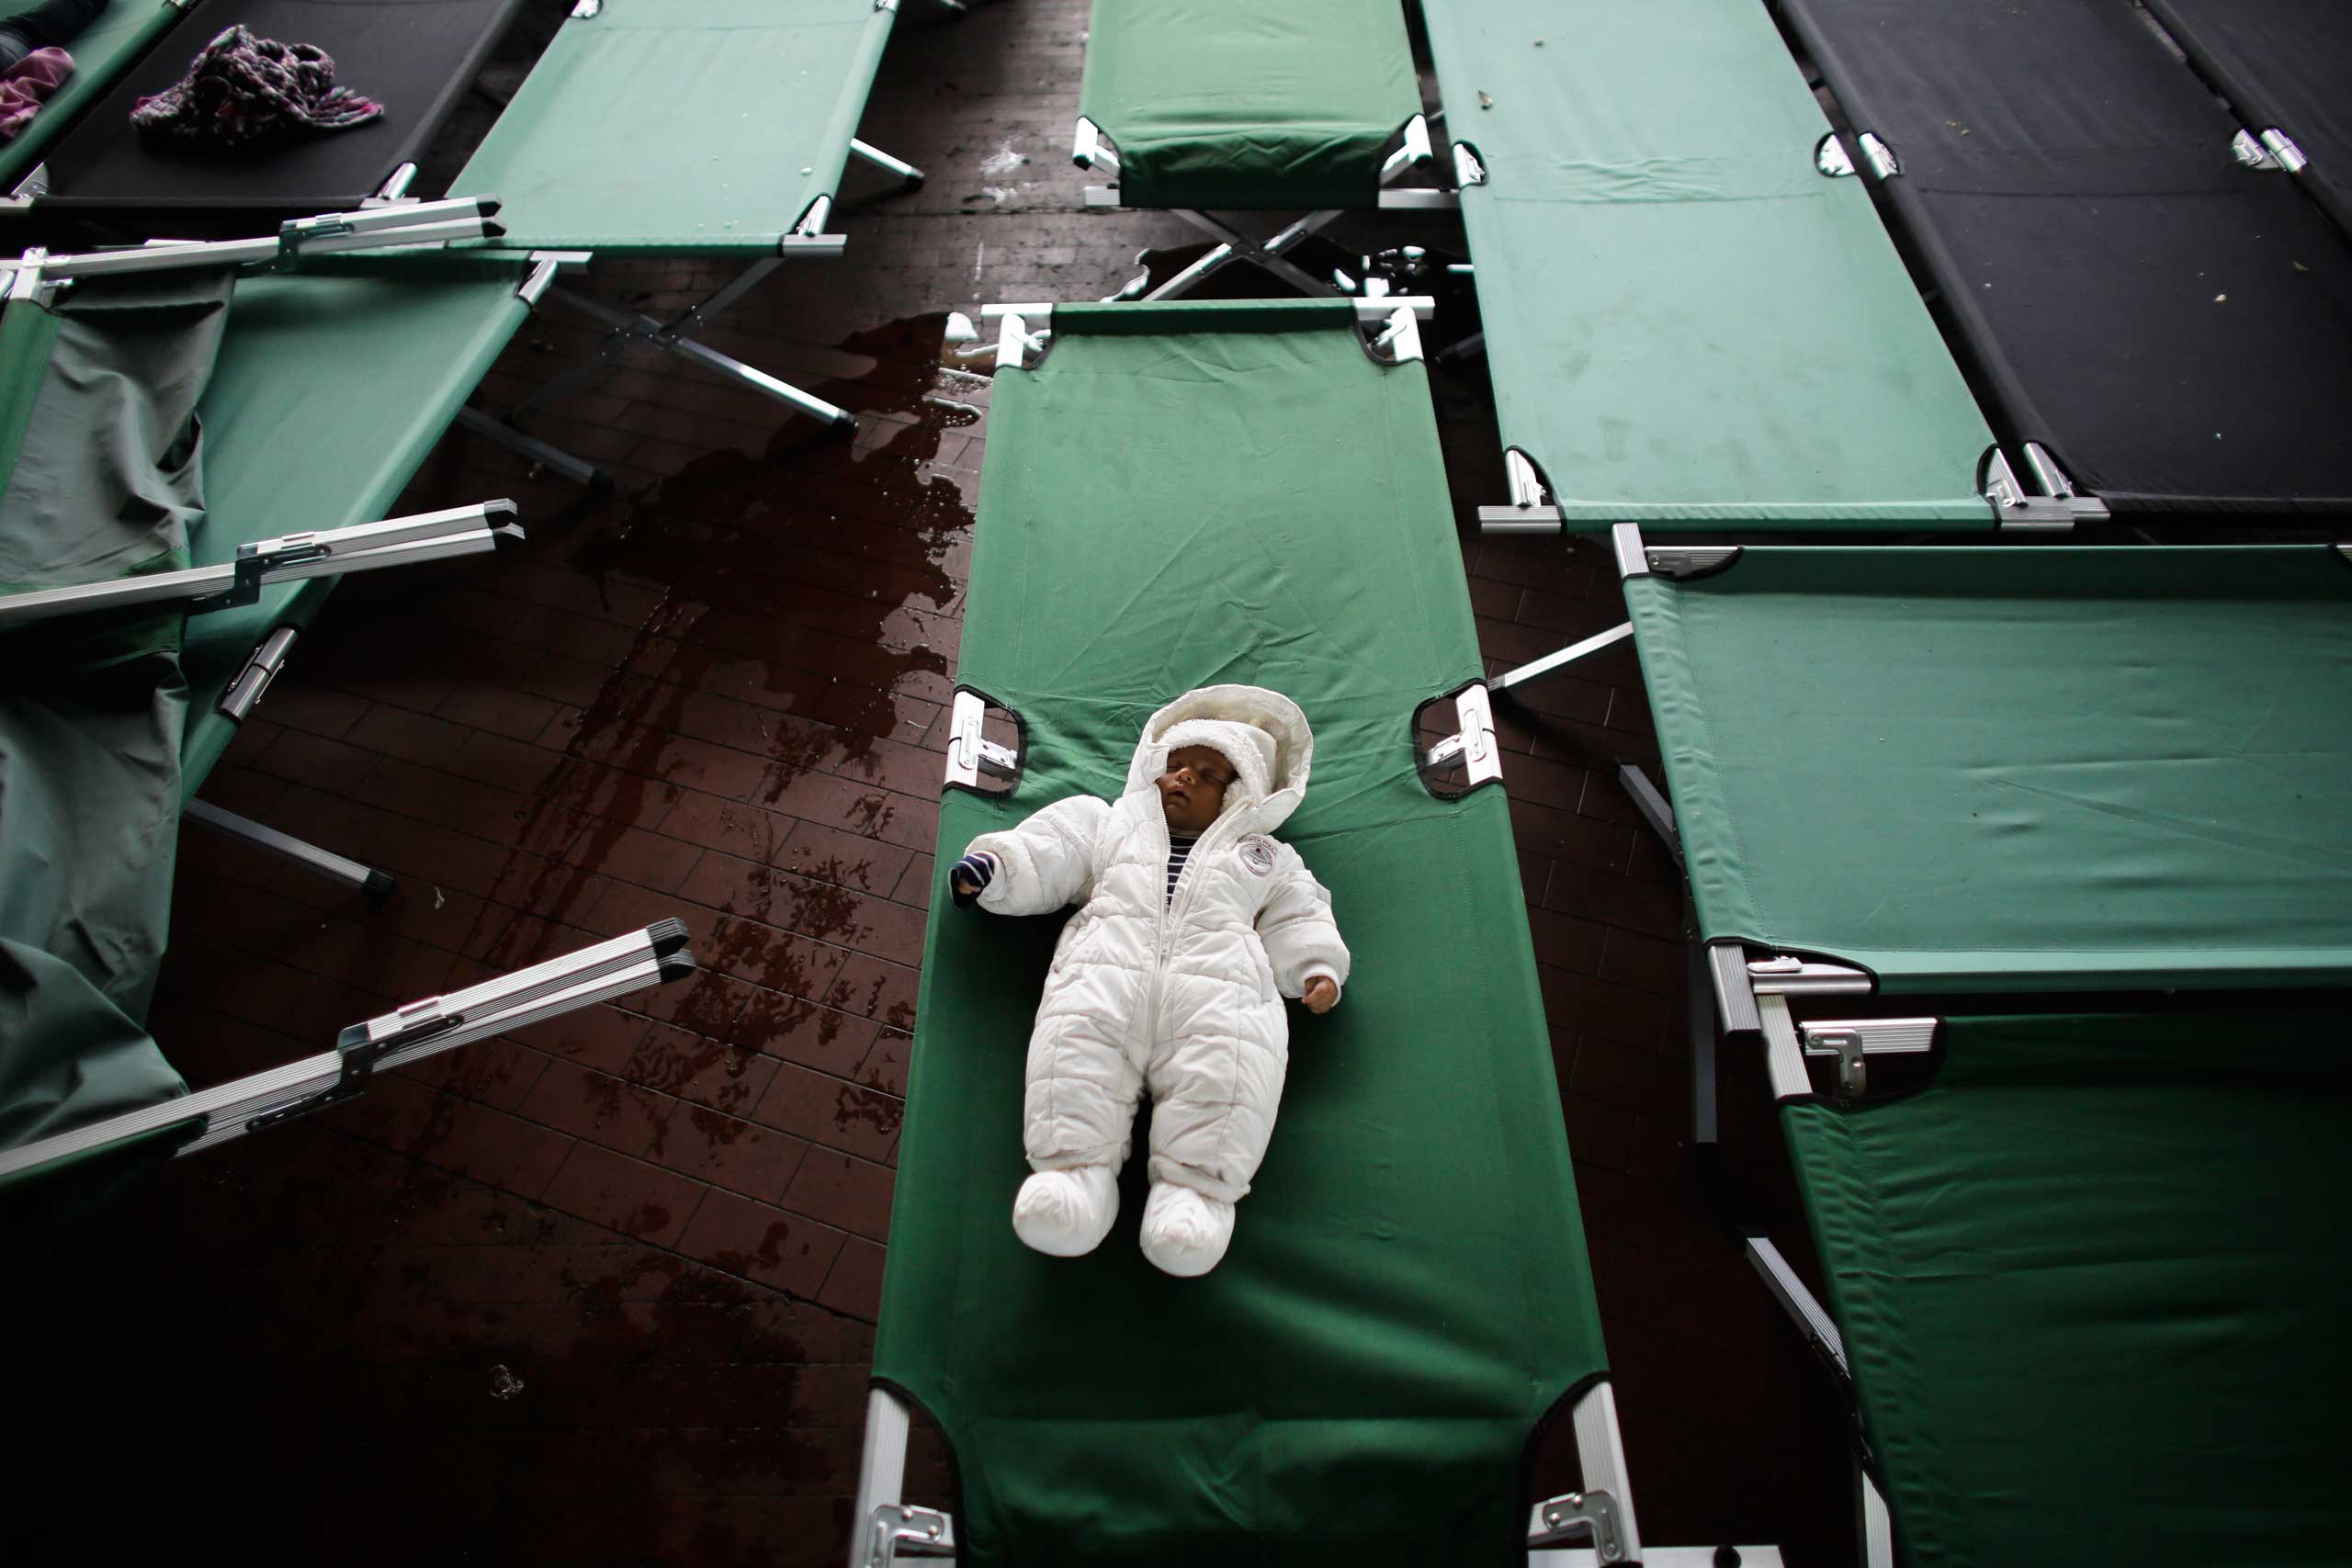 Three month old baby Parwan from Afghanistan sleeps on a bed at the temporary registration center of the southern German border town Passau, on Sept. 15, 2015. (Markus Schreiber—AP)